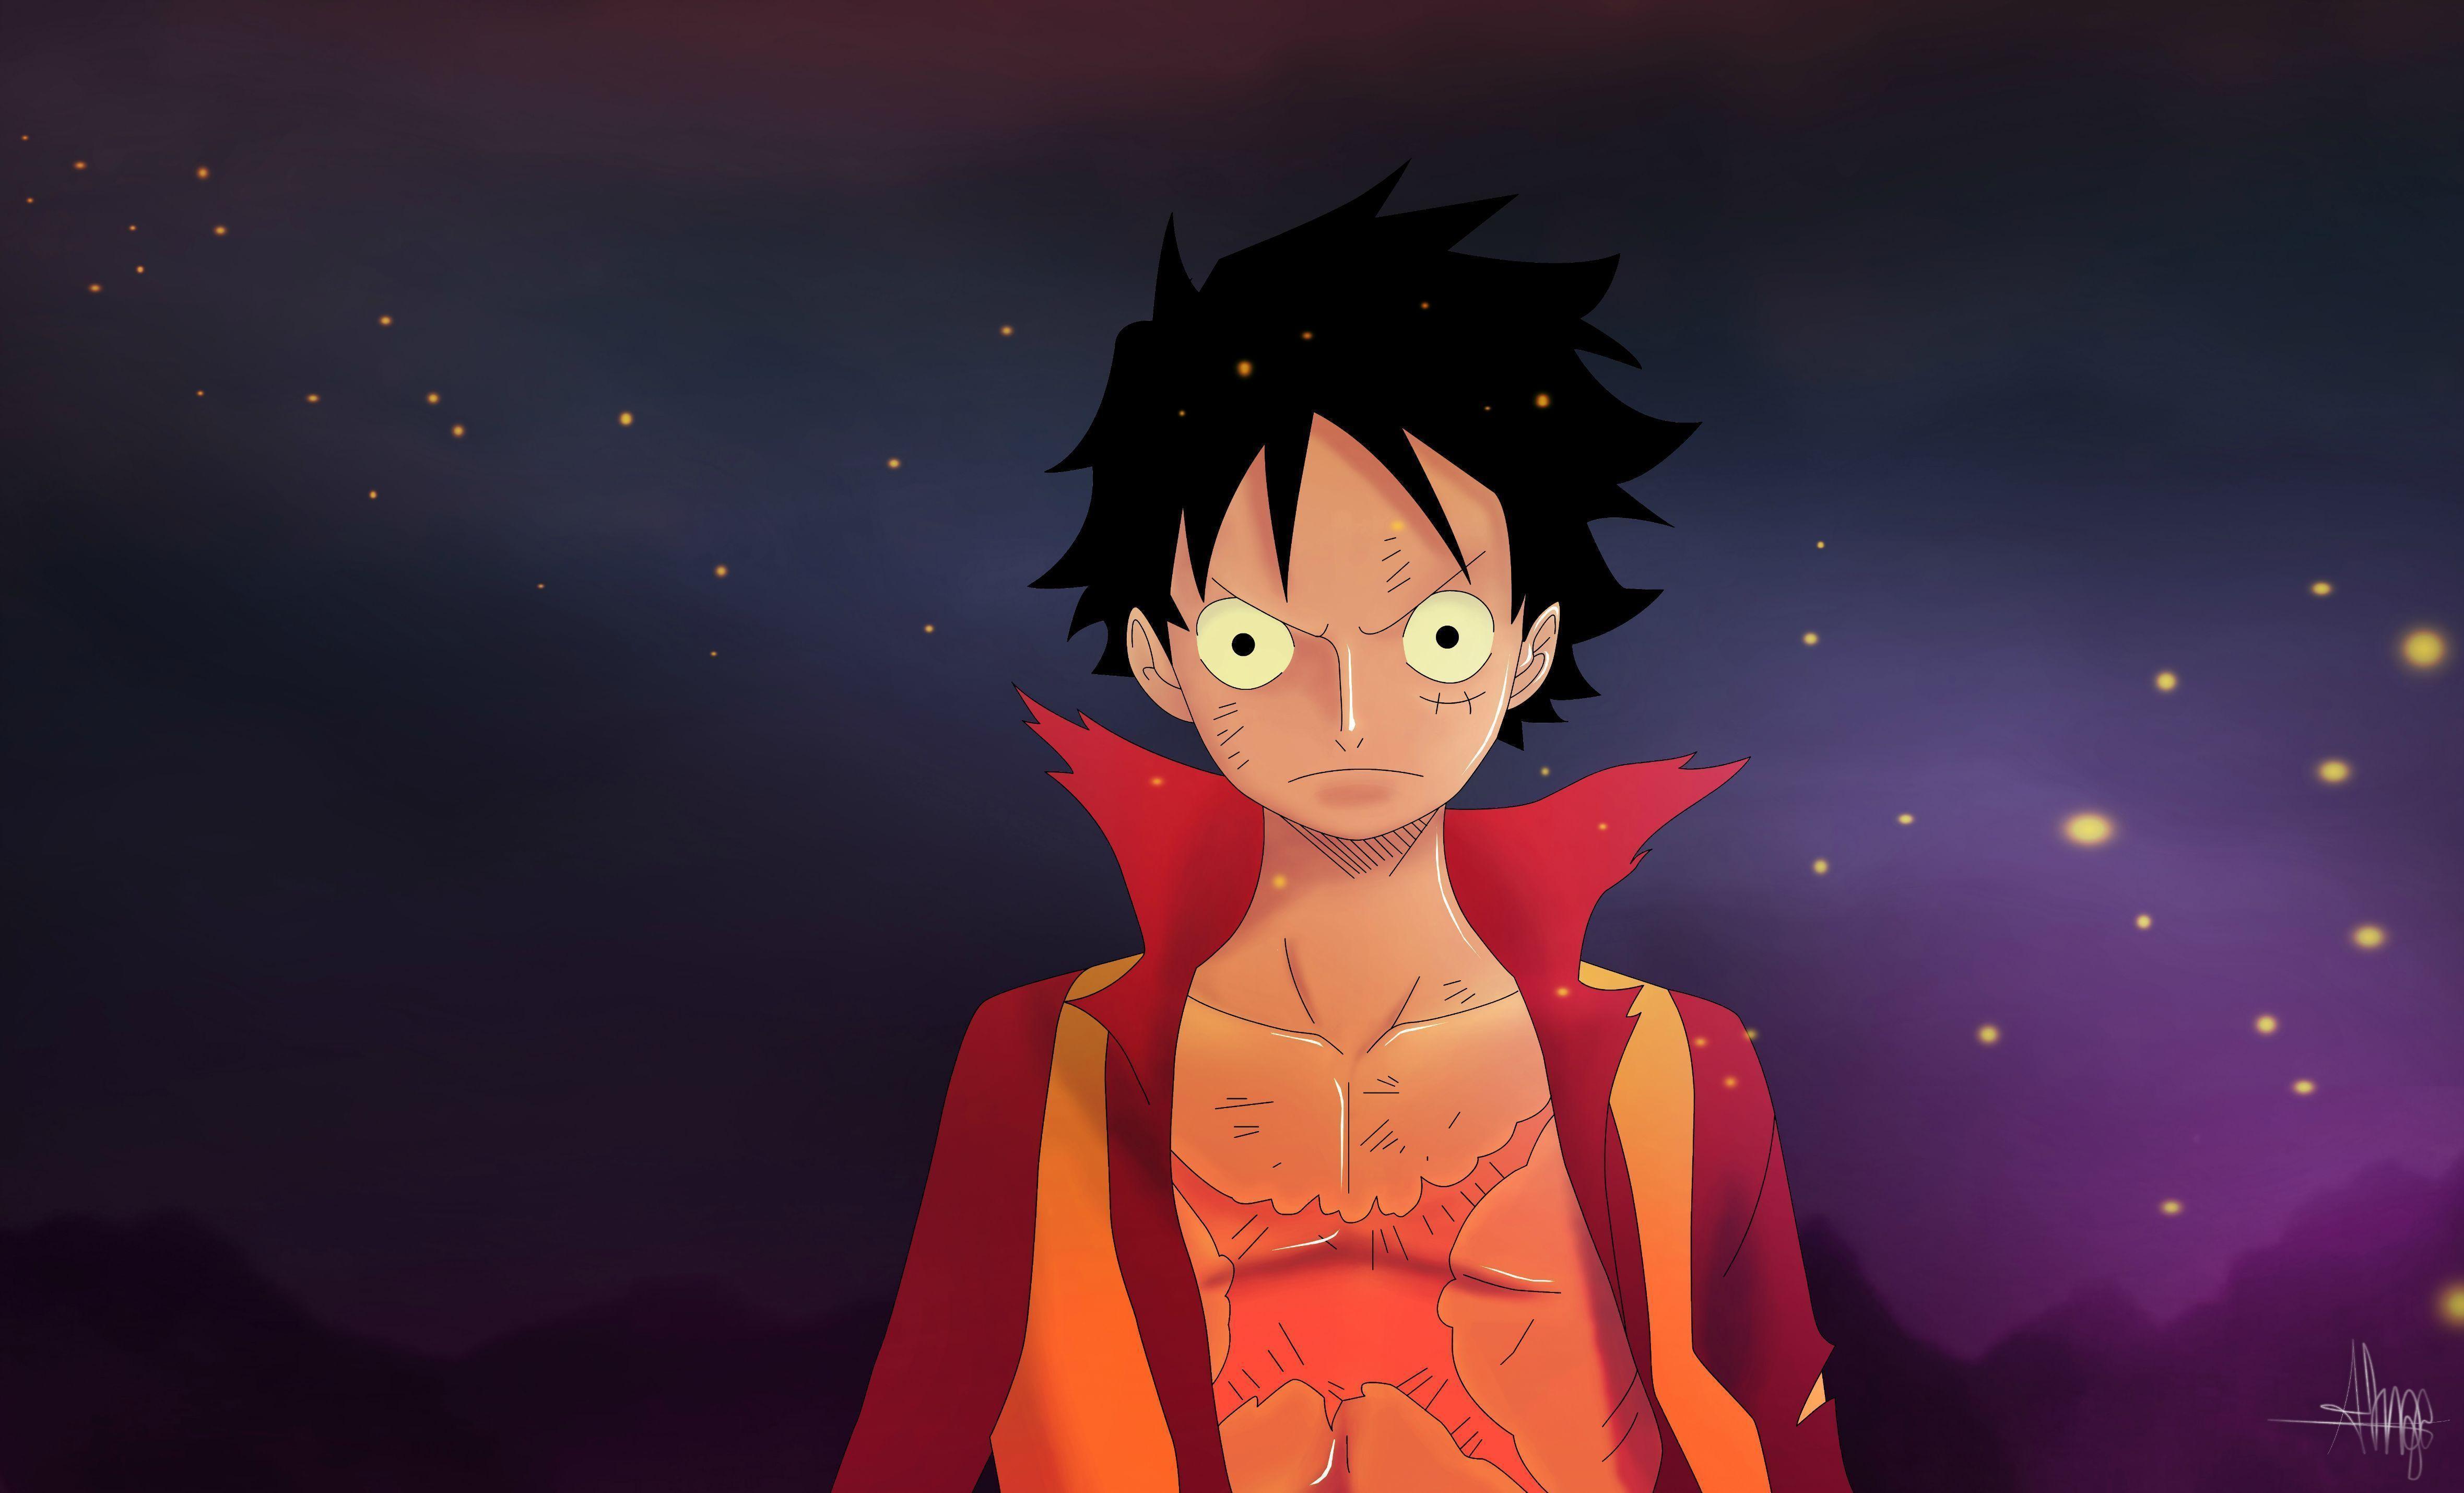 Download 25 Wallpaper One Piece Luffy Hd For Android terbaru 2019